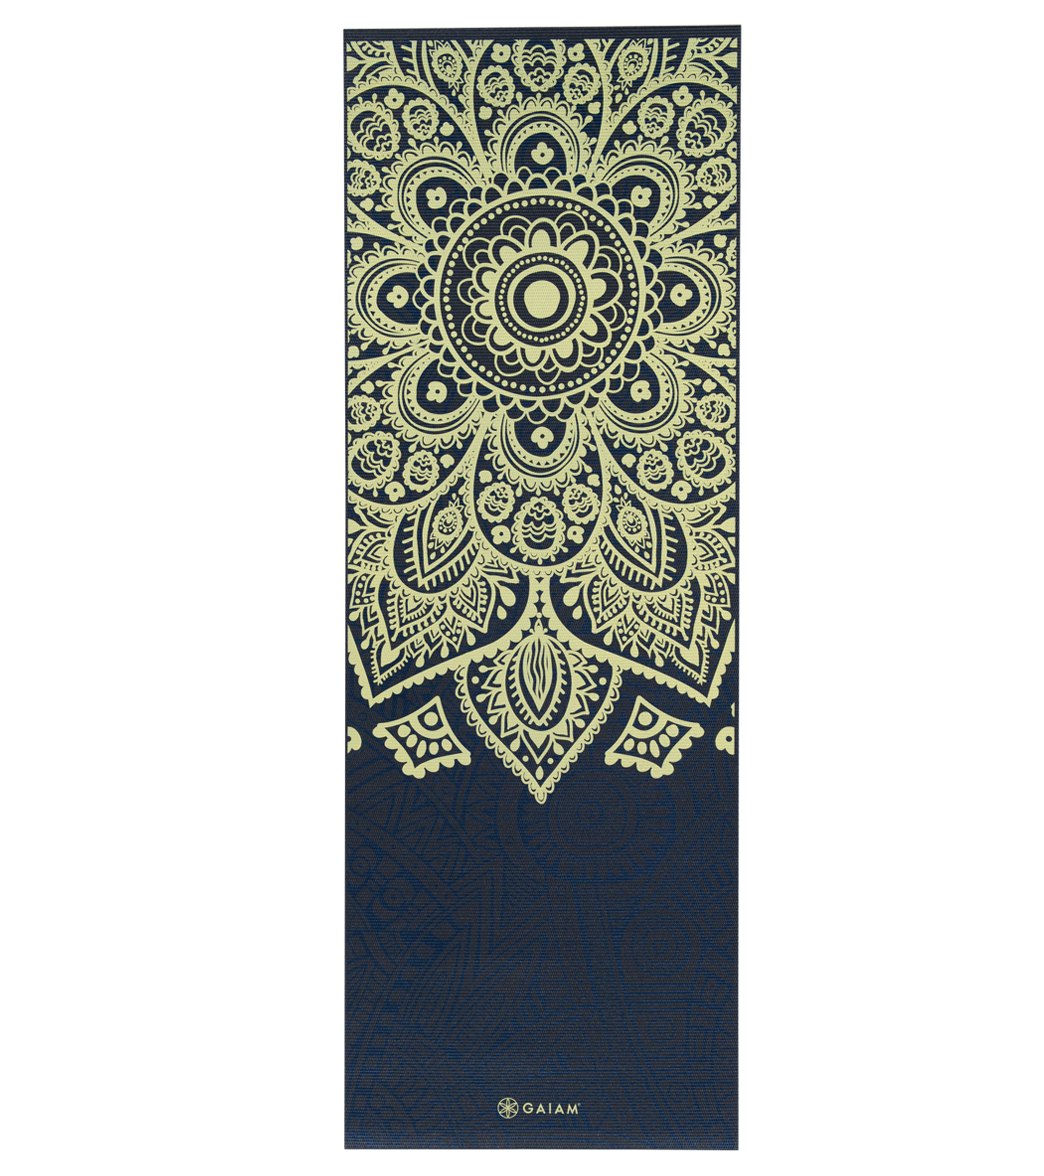 Gaiam Sundial Layers Printed Yoga Mat 68 6mm Extra Thick